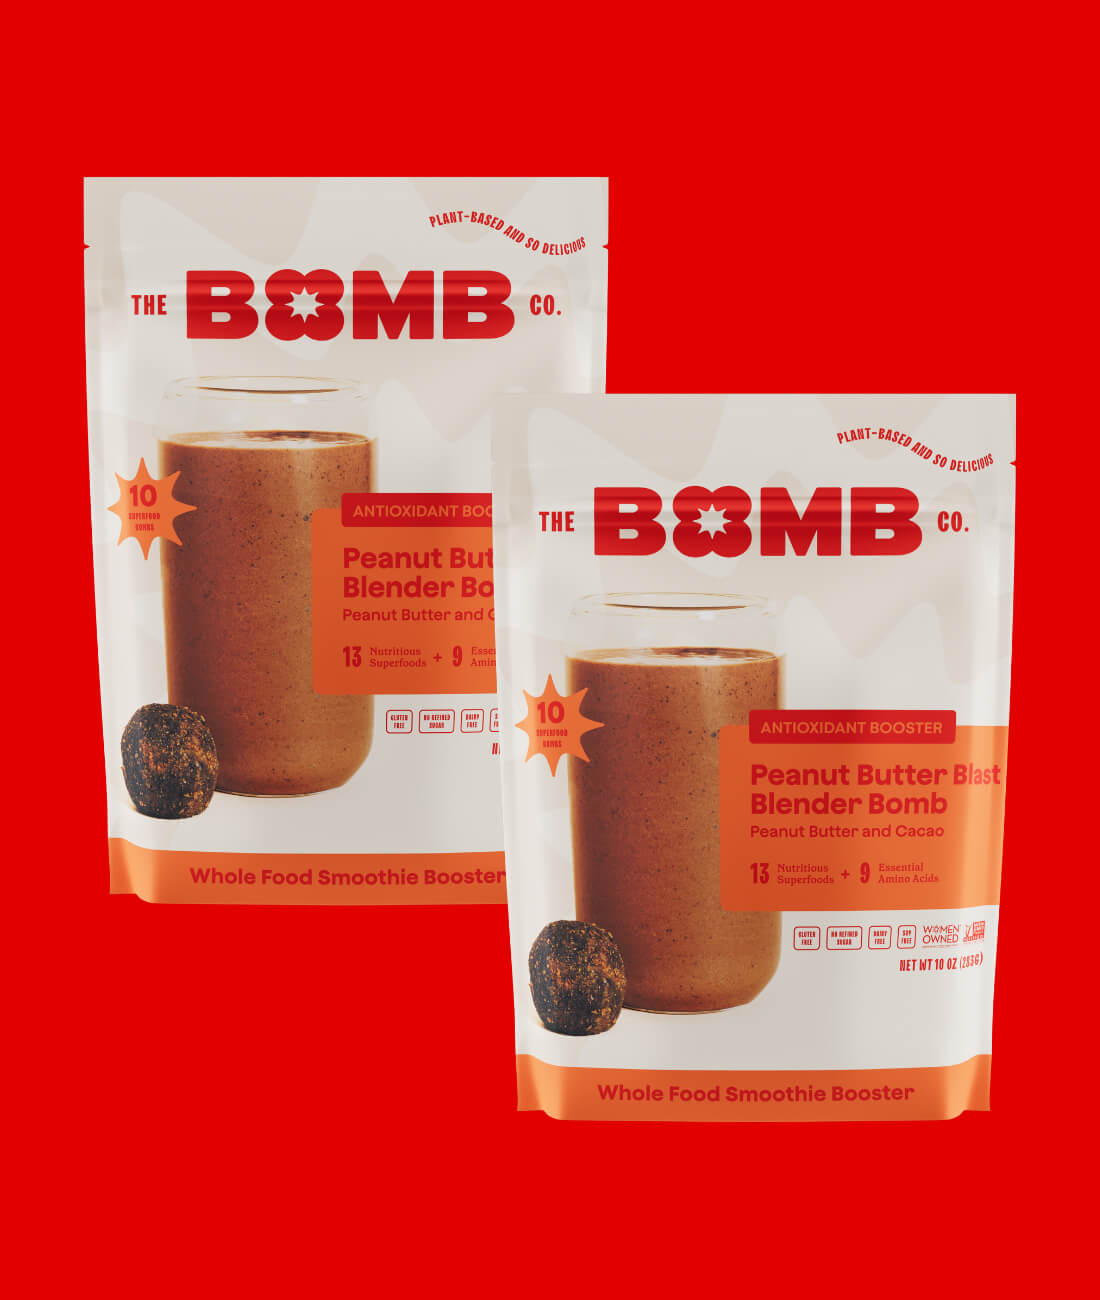 Blender Bombs - Cacao + Peanut Butter 2.3 oz (8 x 2 Pack